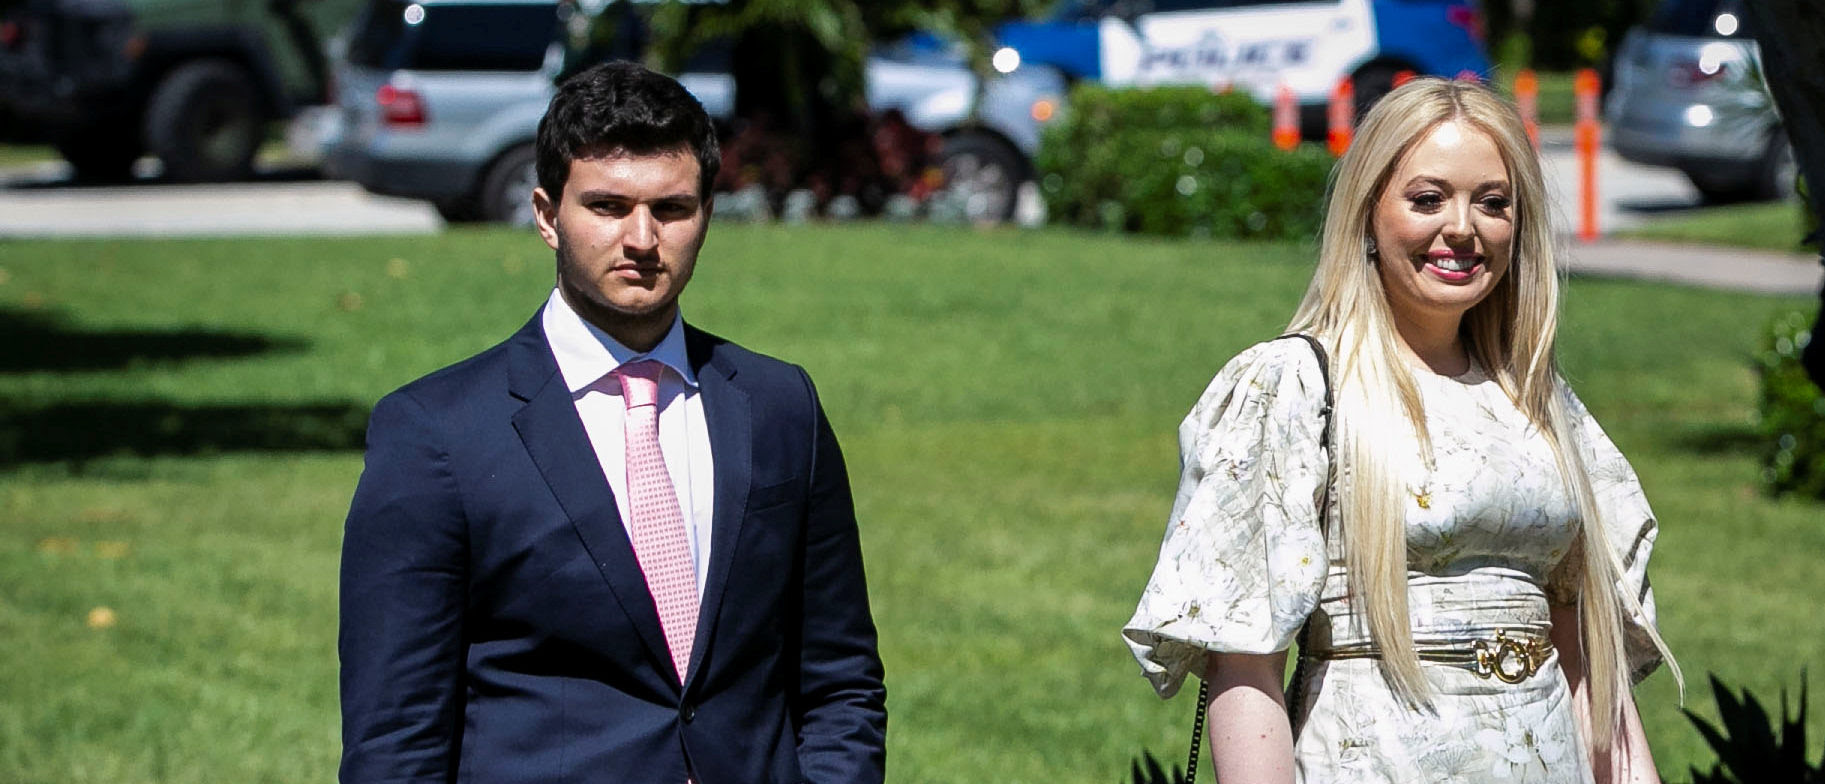 Here’s What We Know About Donald Trump’s Daughter’s Upcoming Wedding